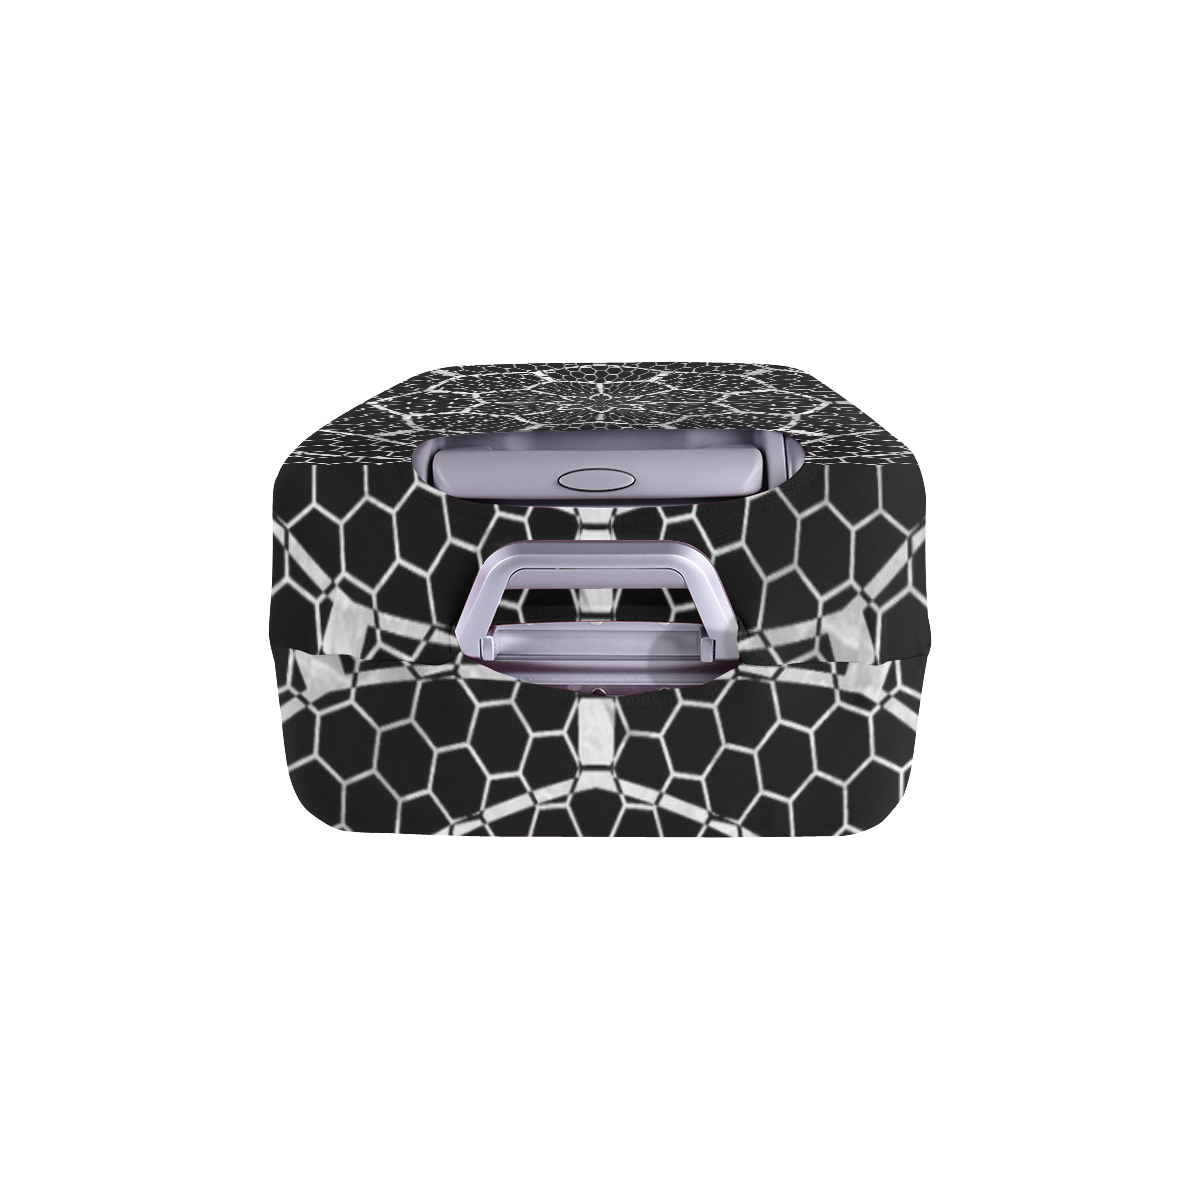 stunning black and white 09 Luggage Cover/Large 26"-28"